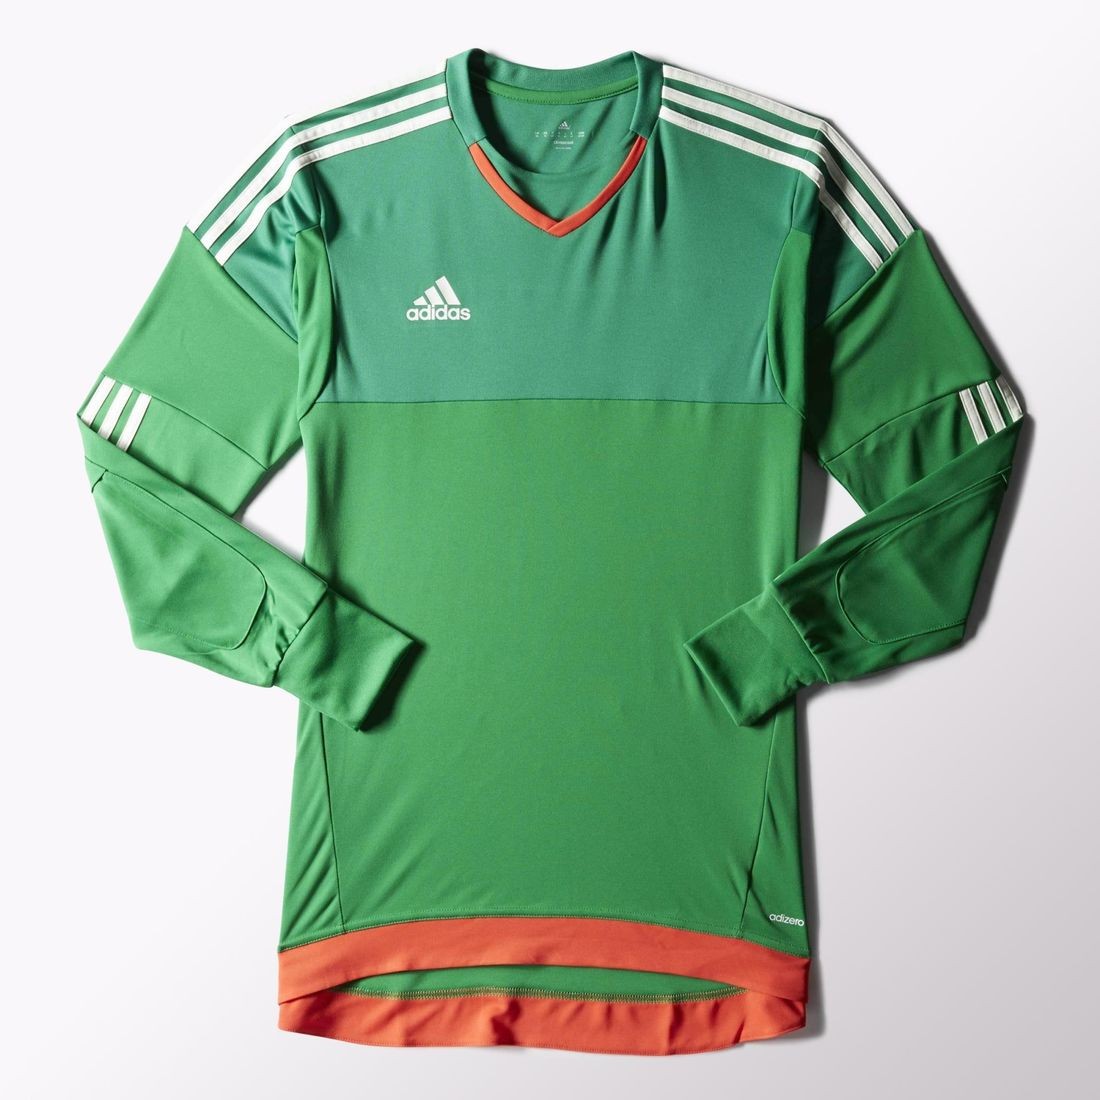 adidas Top 15 Youth Goalkeeper Jersey - Soccer Premier